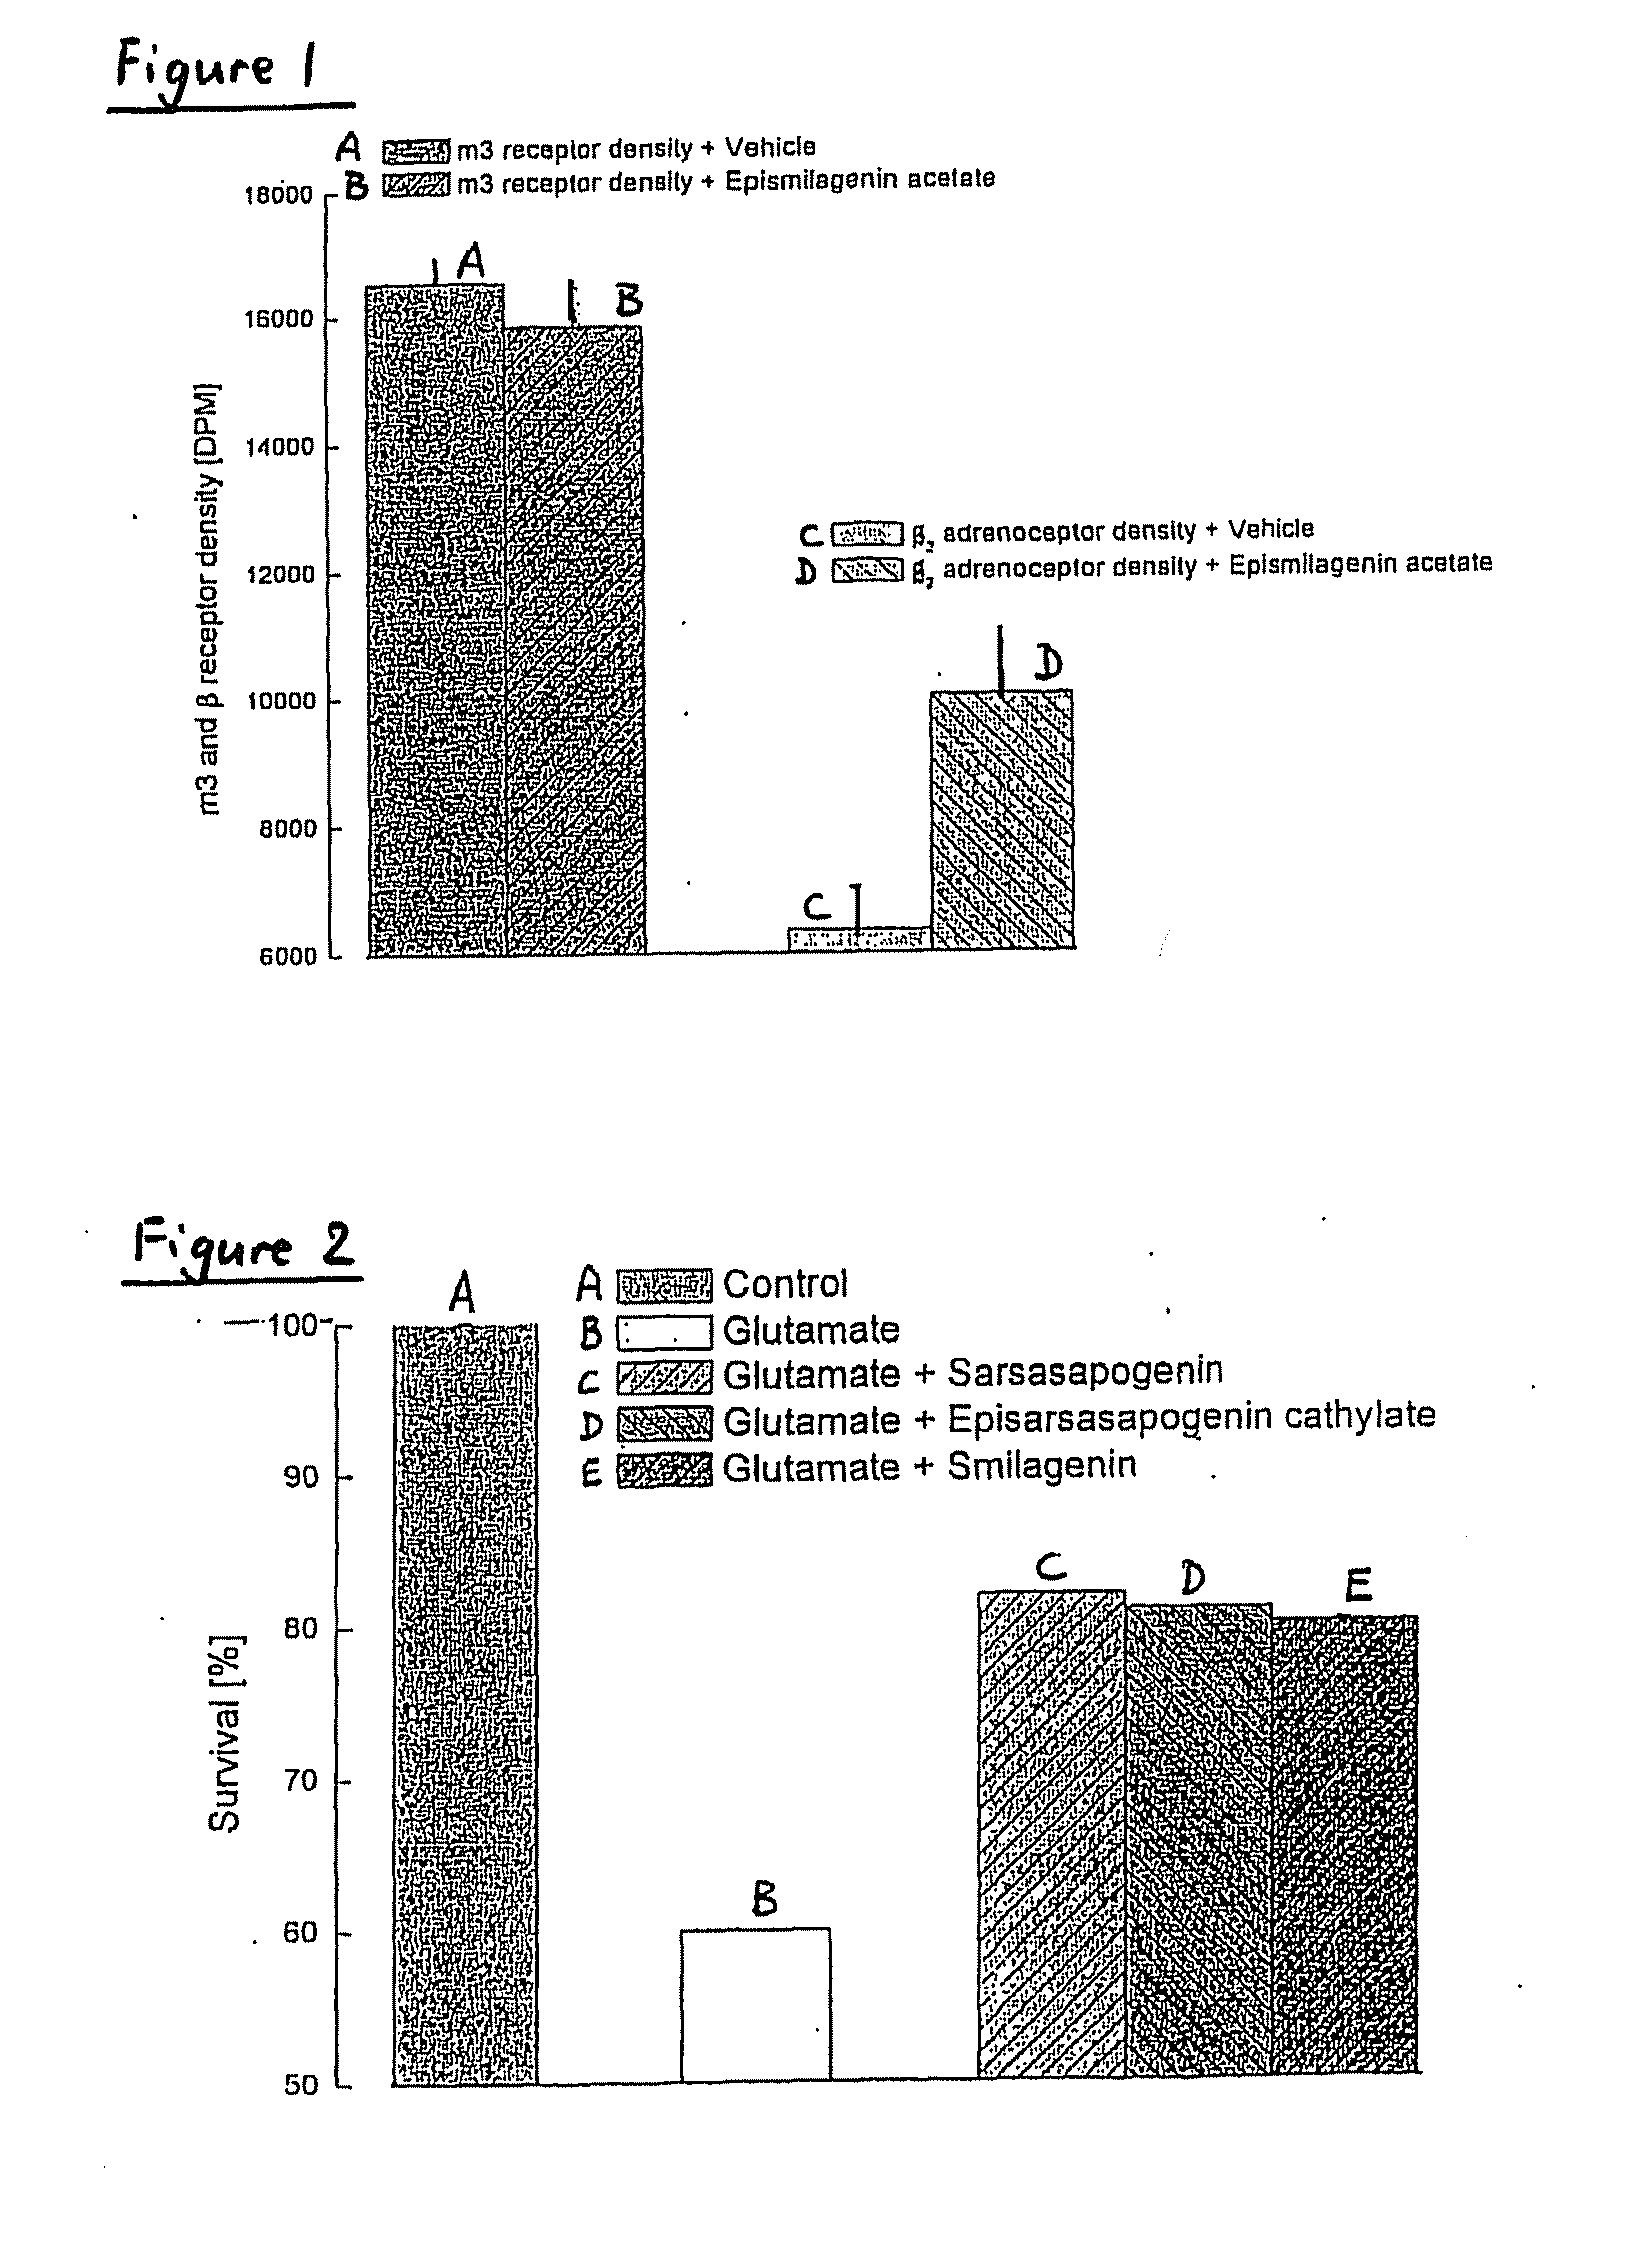 Therapeutic methods and uses of sapogenins and their derivatives